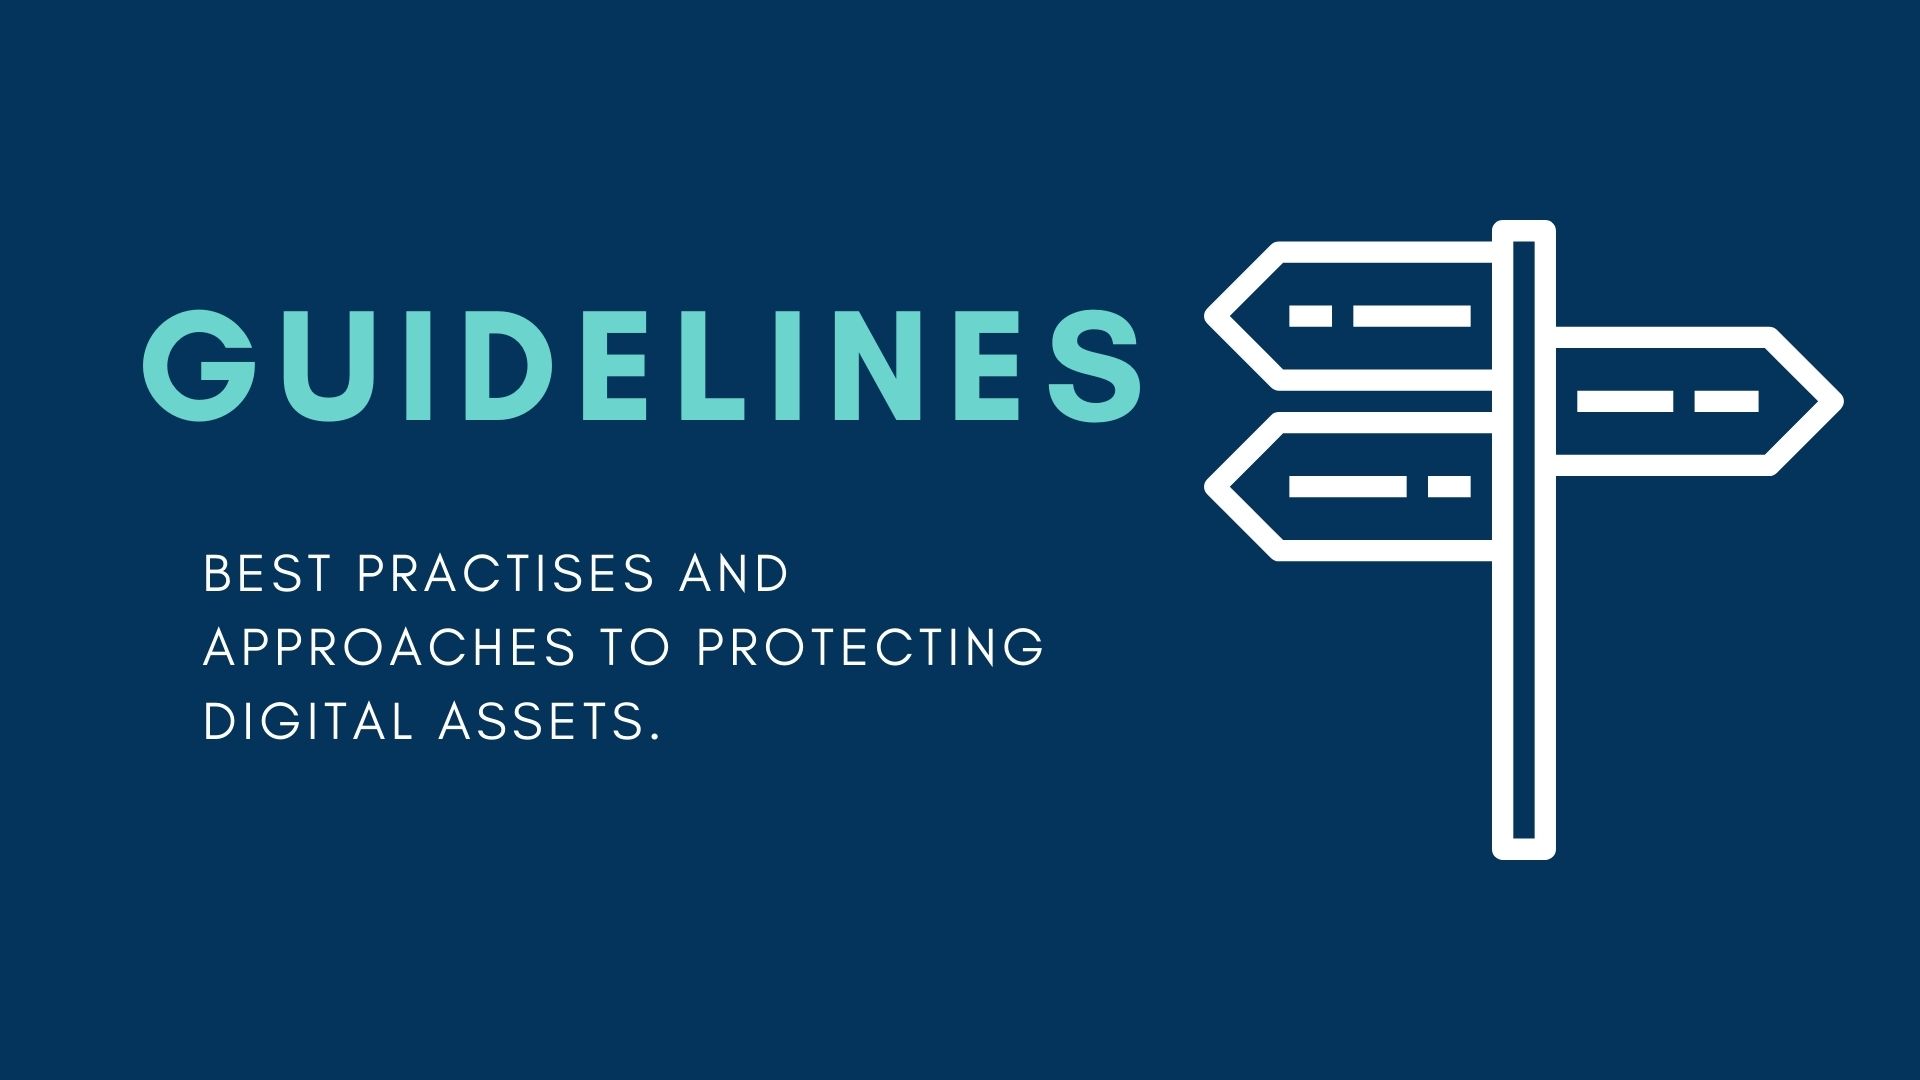 Guidelines: Best practices and approaches to protecting digital assets